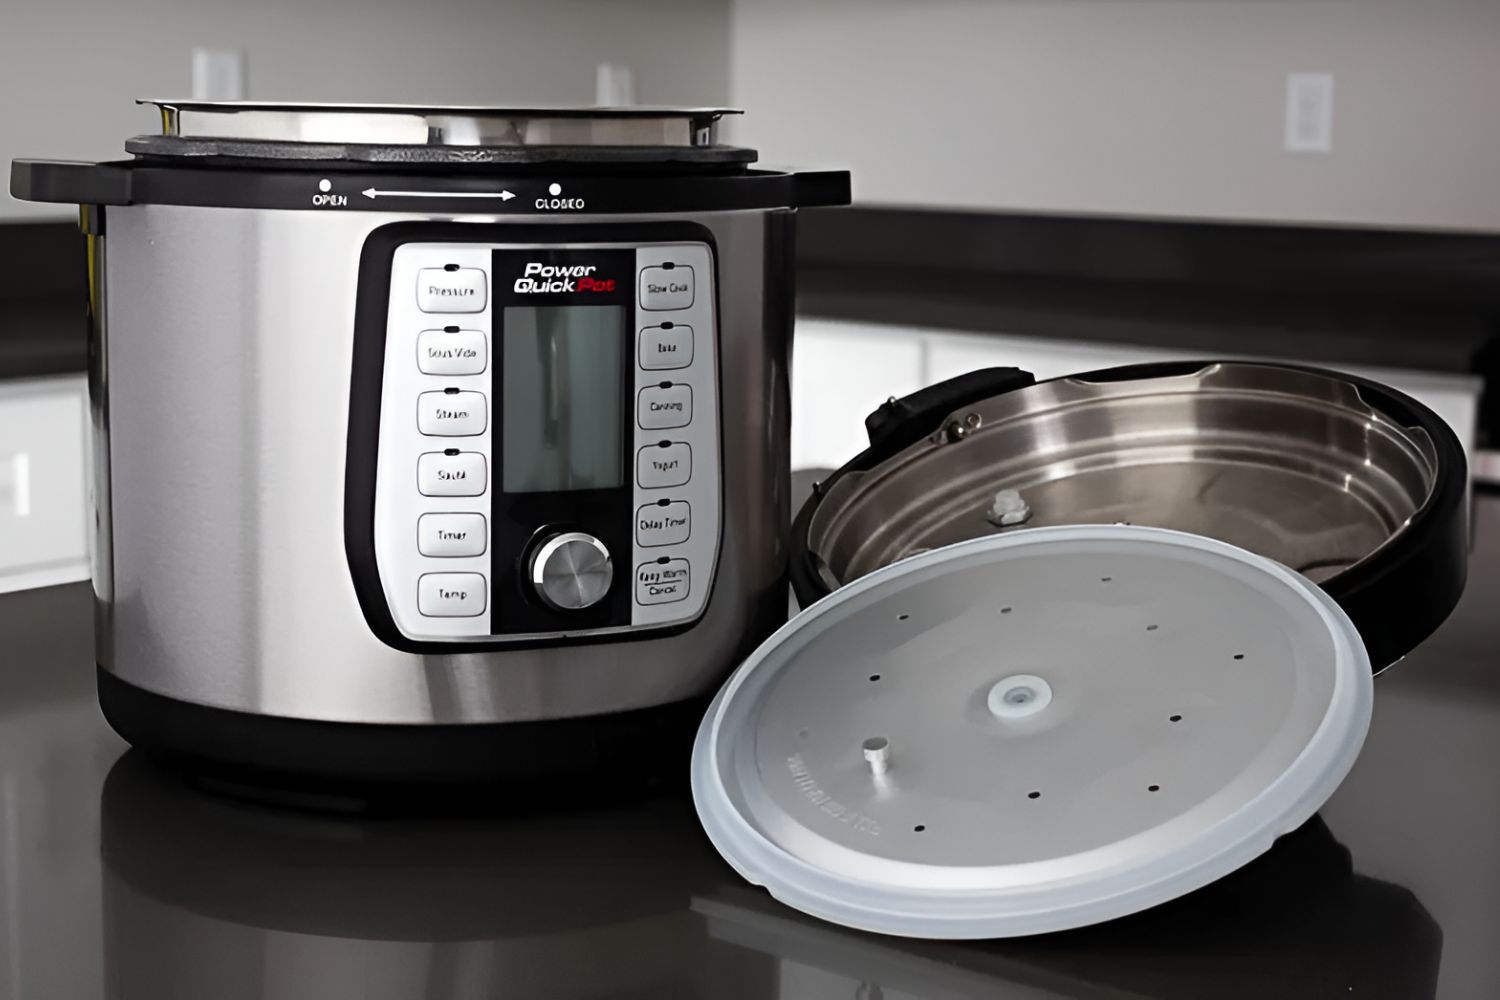 How Many Watts Does A 10-Quart Electric Pressure Cooker Pull